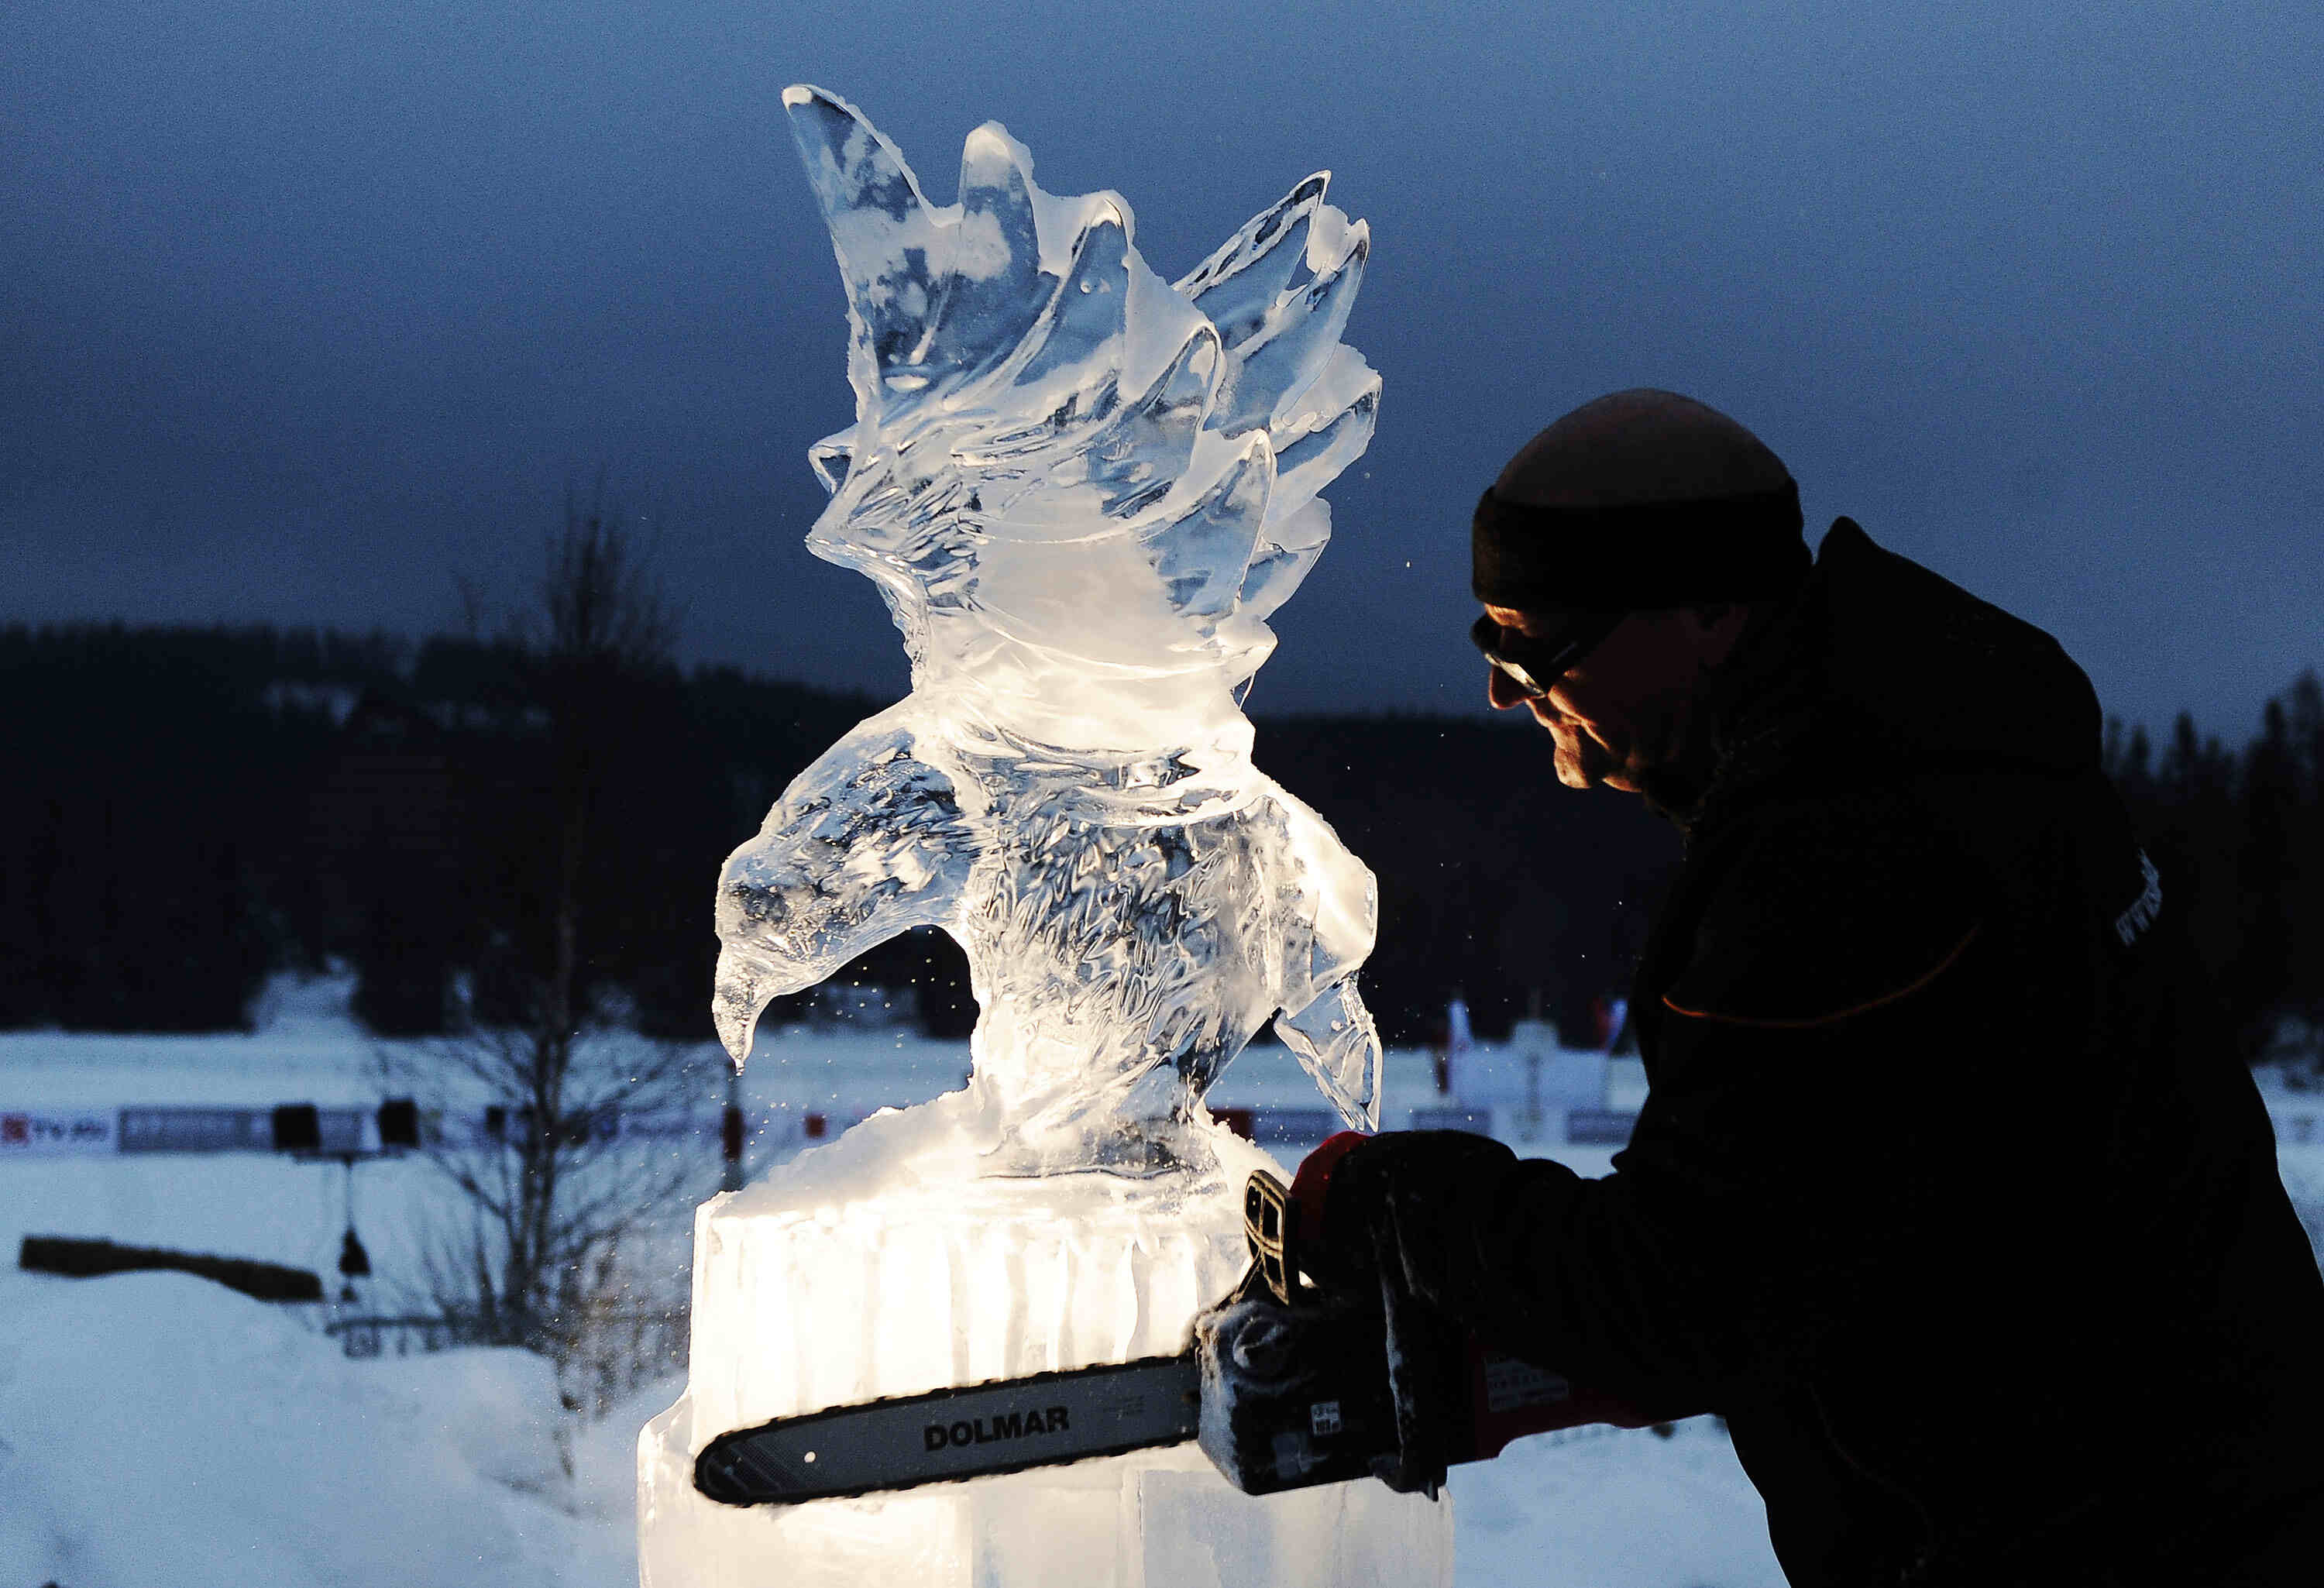 How To Make Ice For Ice Sculpture